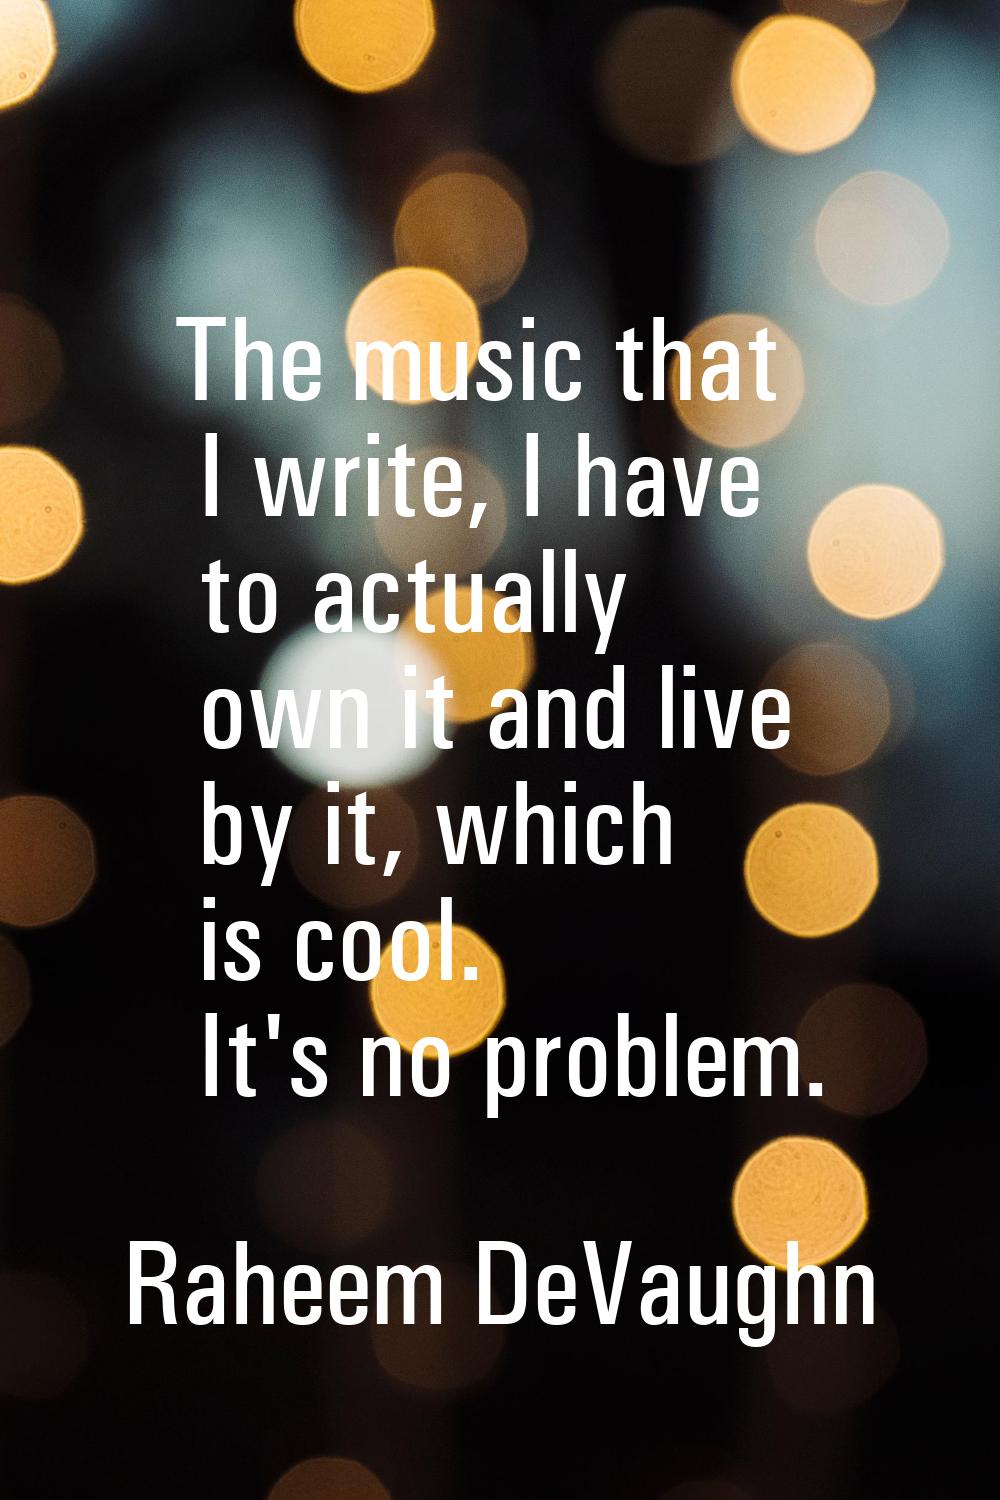 The music that I write, I have to actually own it and live by it, which is cool. It's no problem.